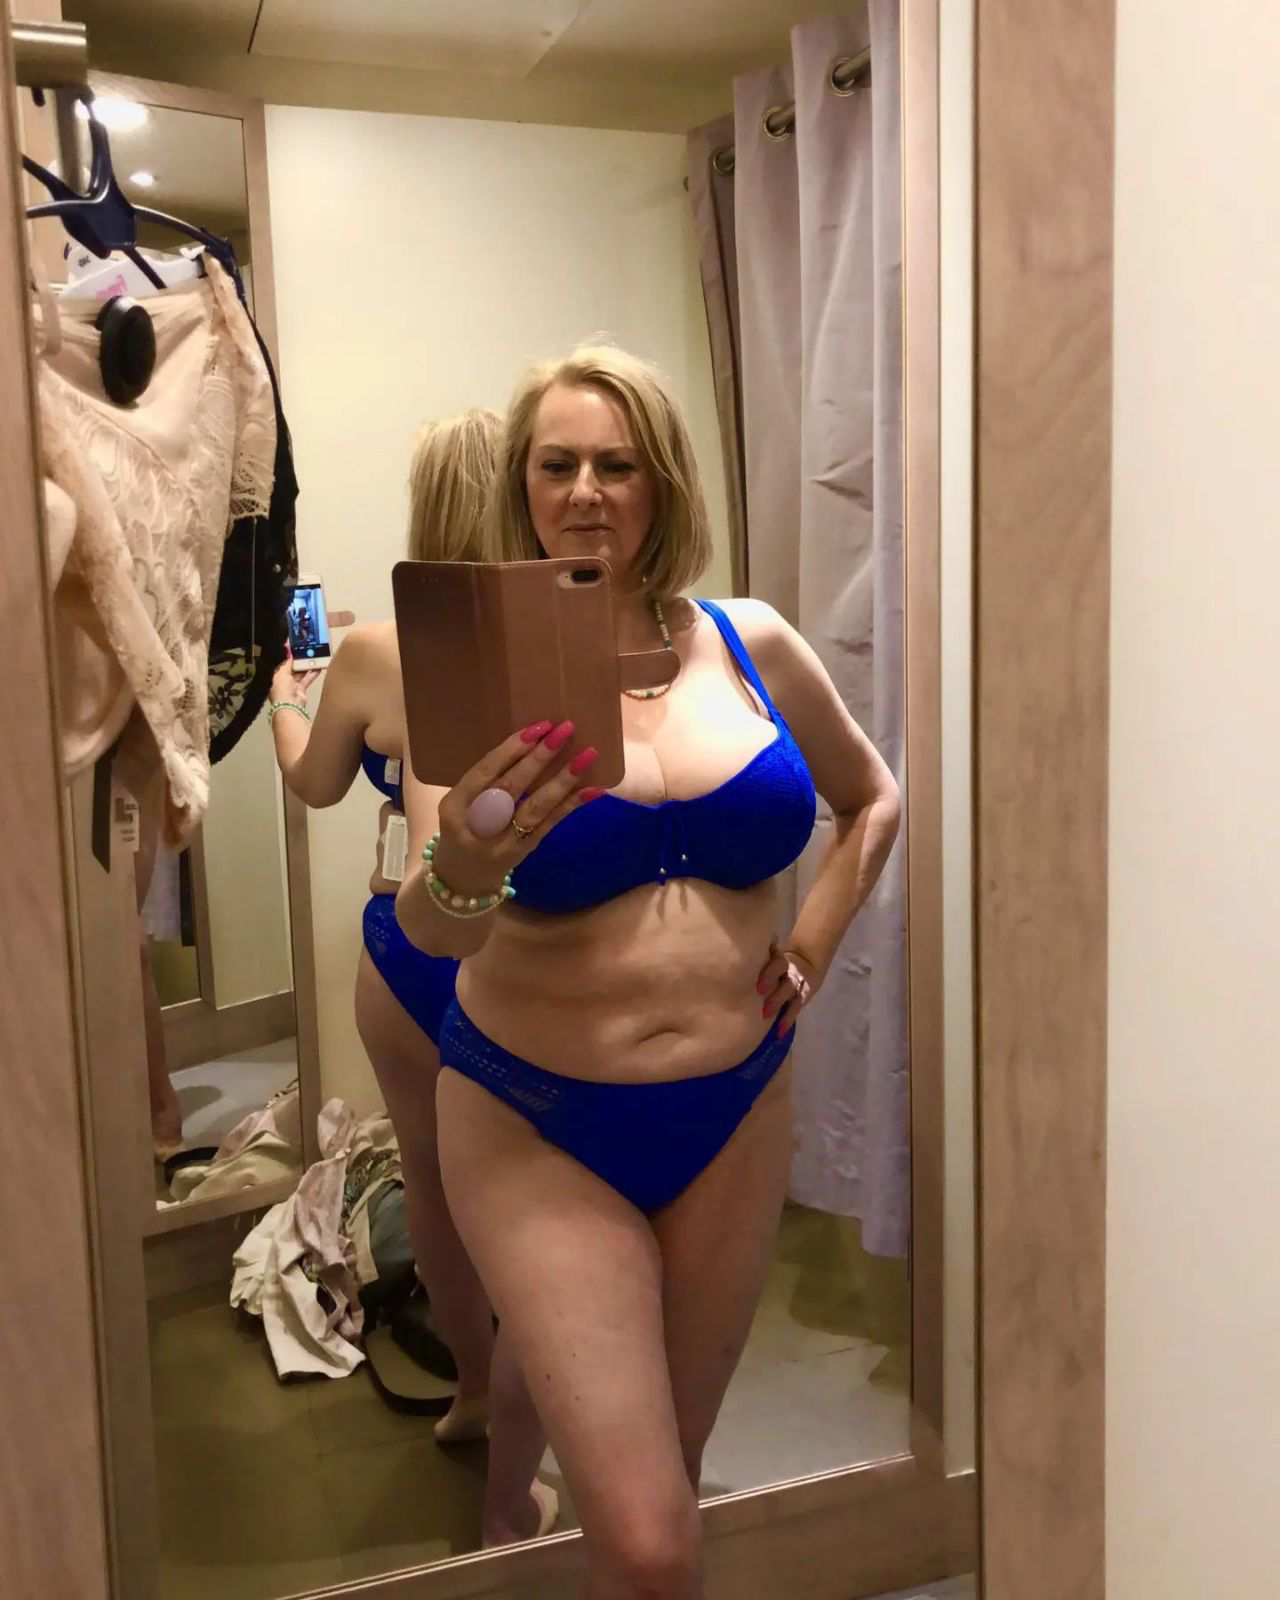 49, OLD AND EXPERIENCE MATURE WOMAN